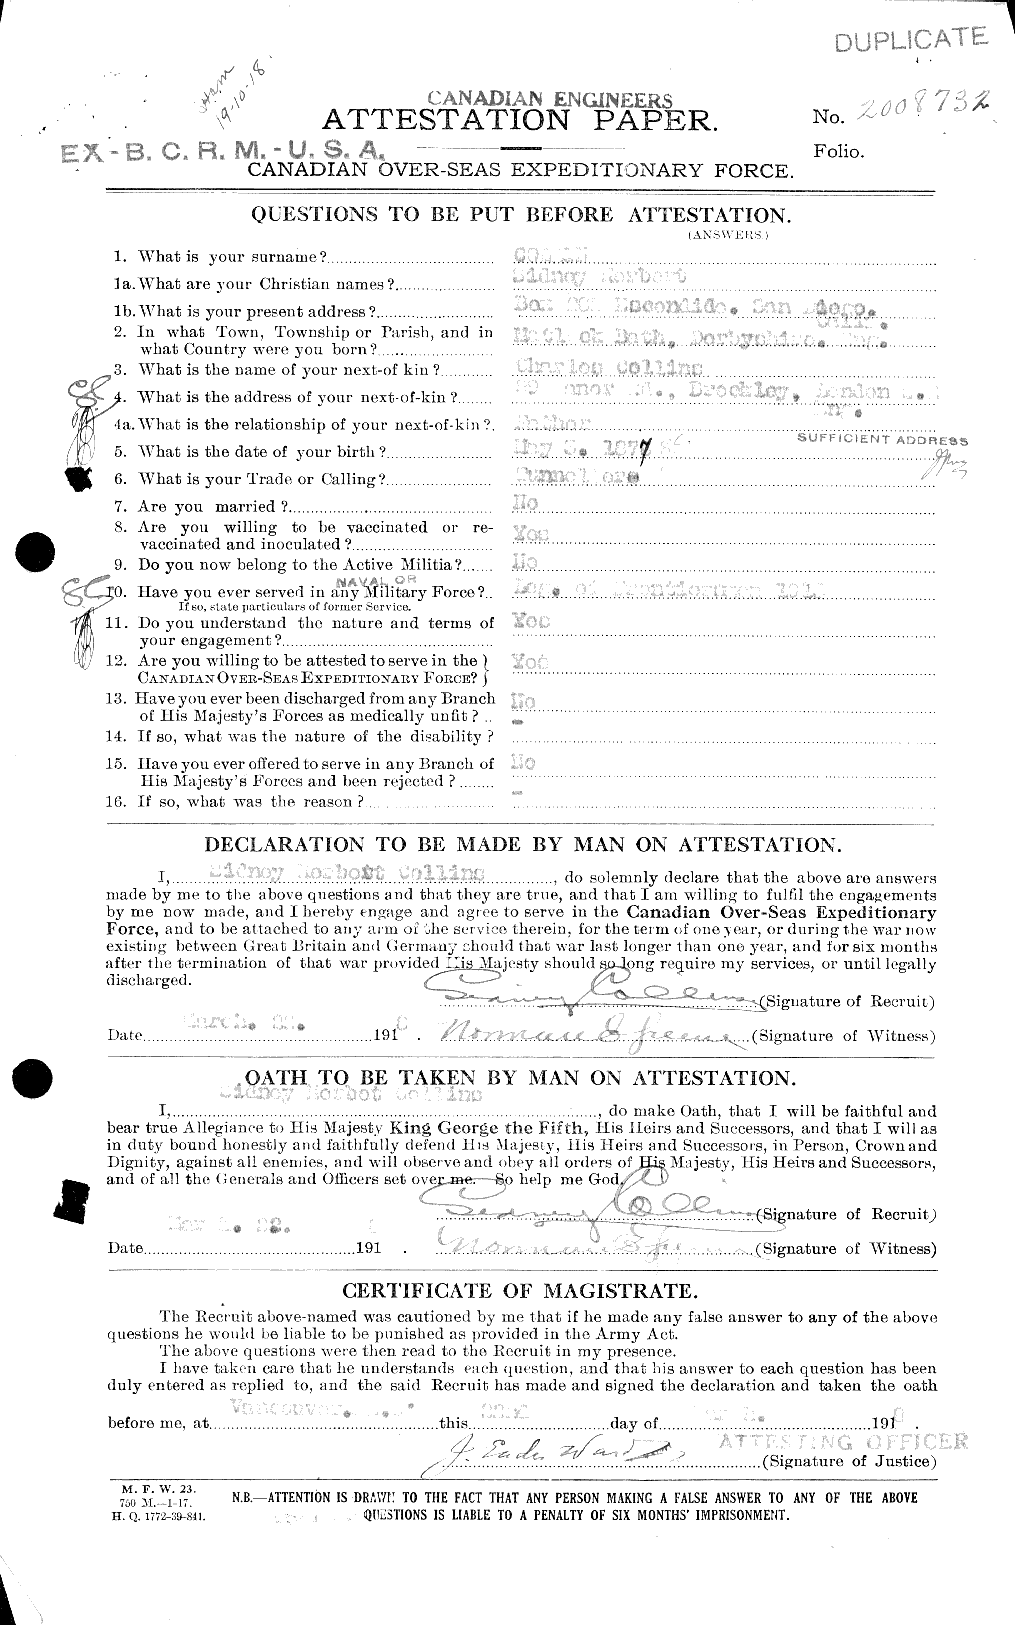 Personnel Records of the First World War - CEF 034546a